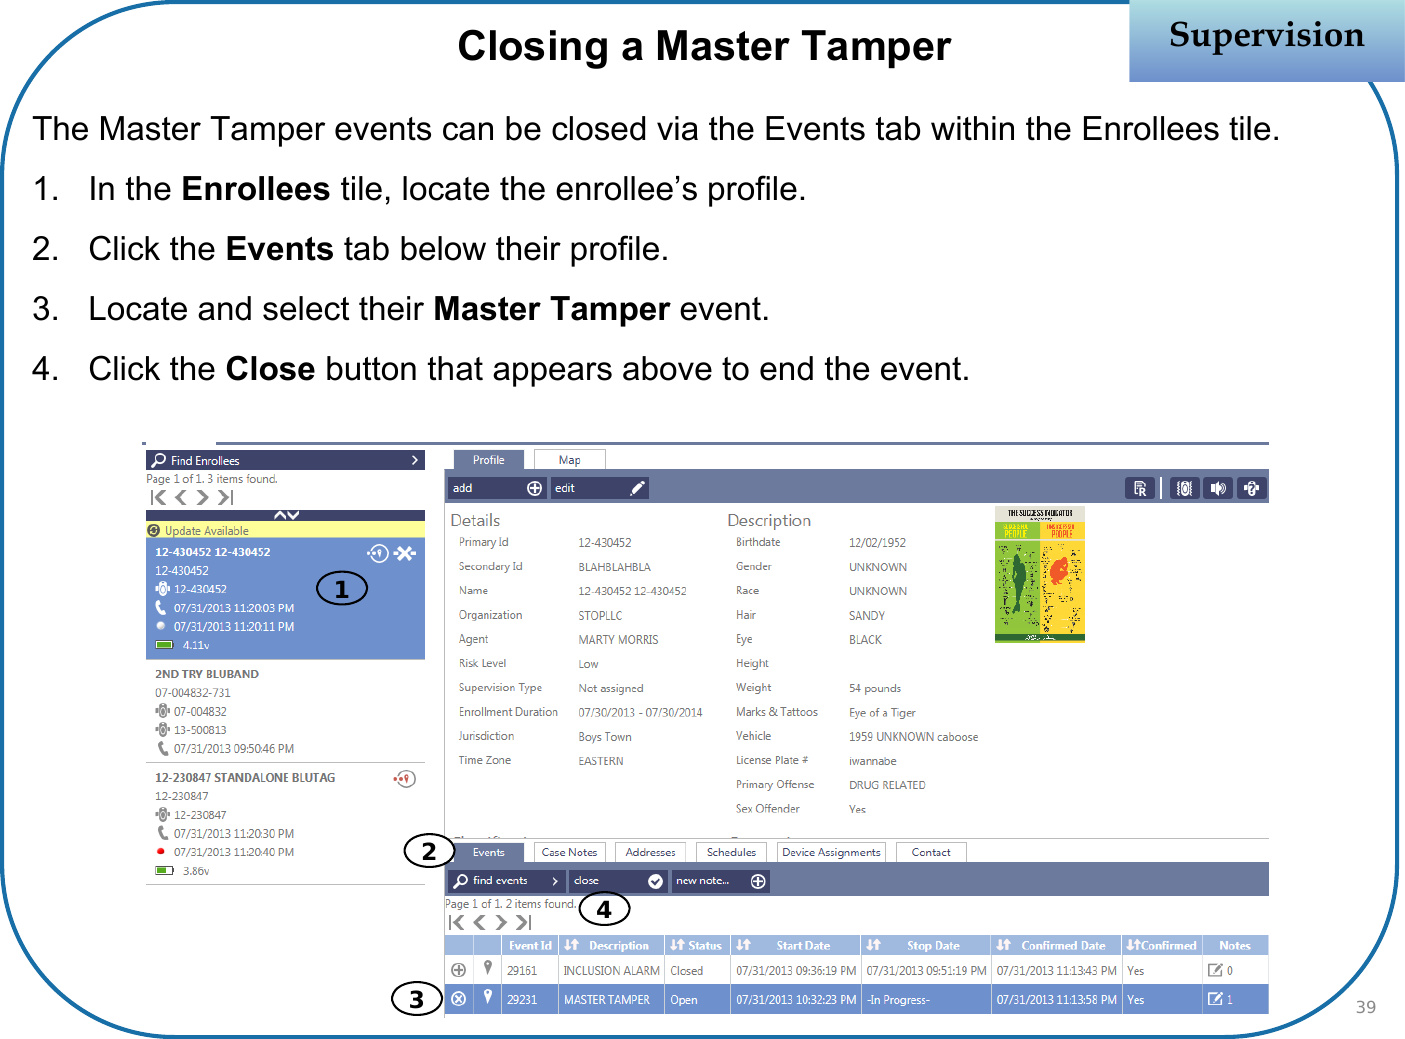 Closing a Master TamperThe Master Tamper events can be closed via the Events tab within the Enrollees tile.1. In the Enrollees tile, locate the enrollee’s profile.2. Click the Events tab below their profile.3. Locate and select their Master Tamper event. 4. Click the Close button that appears above to end the event.SupervisionSupervision342139